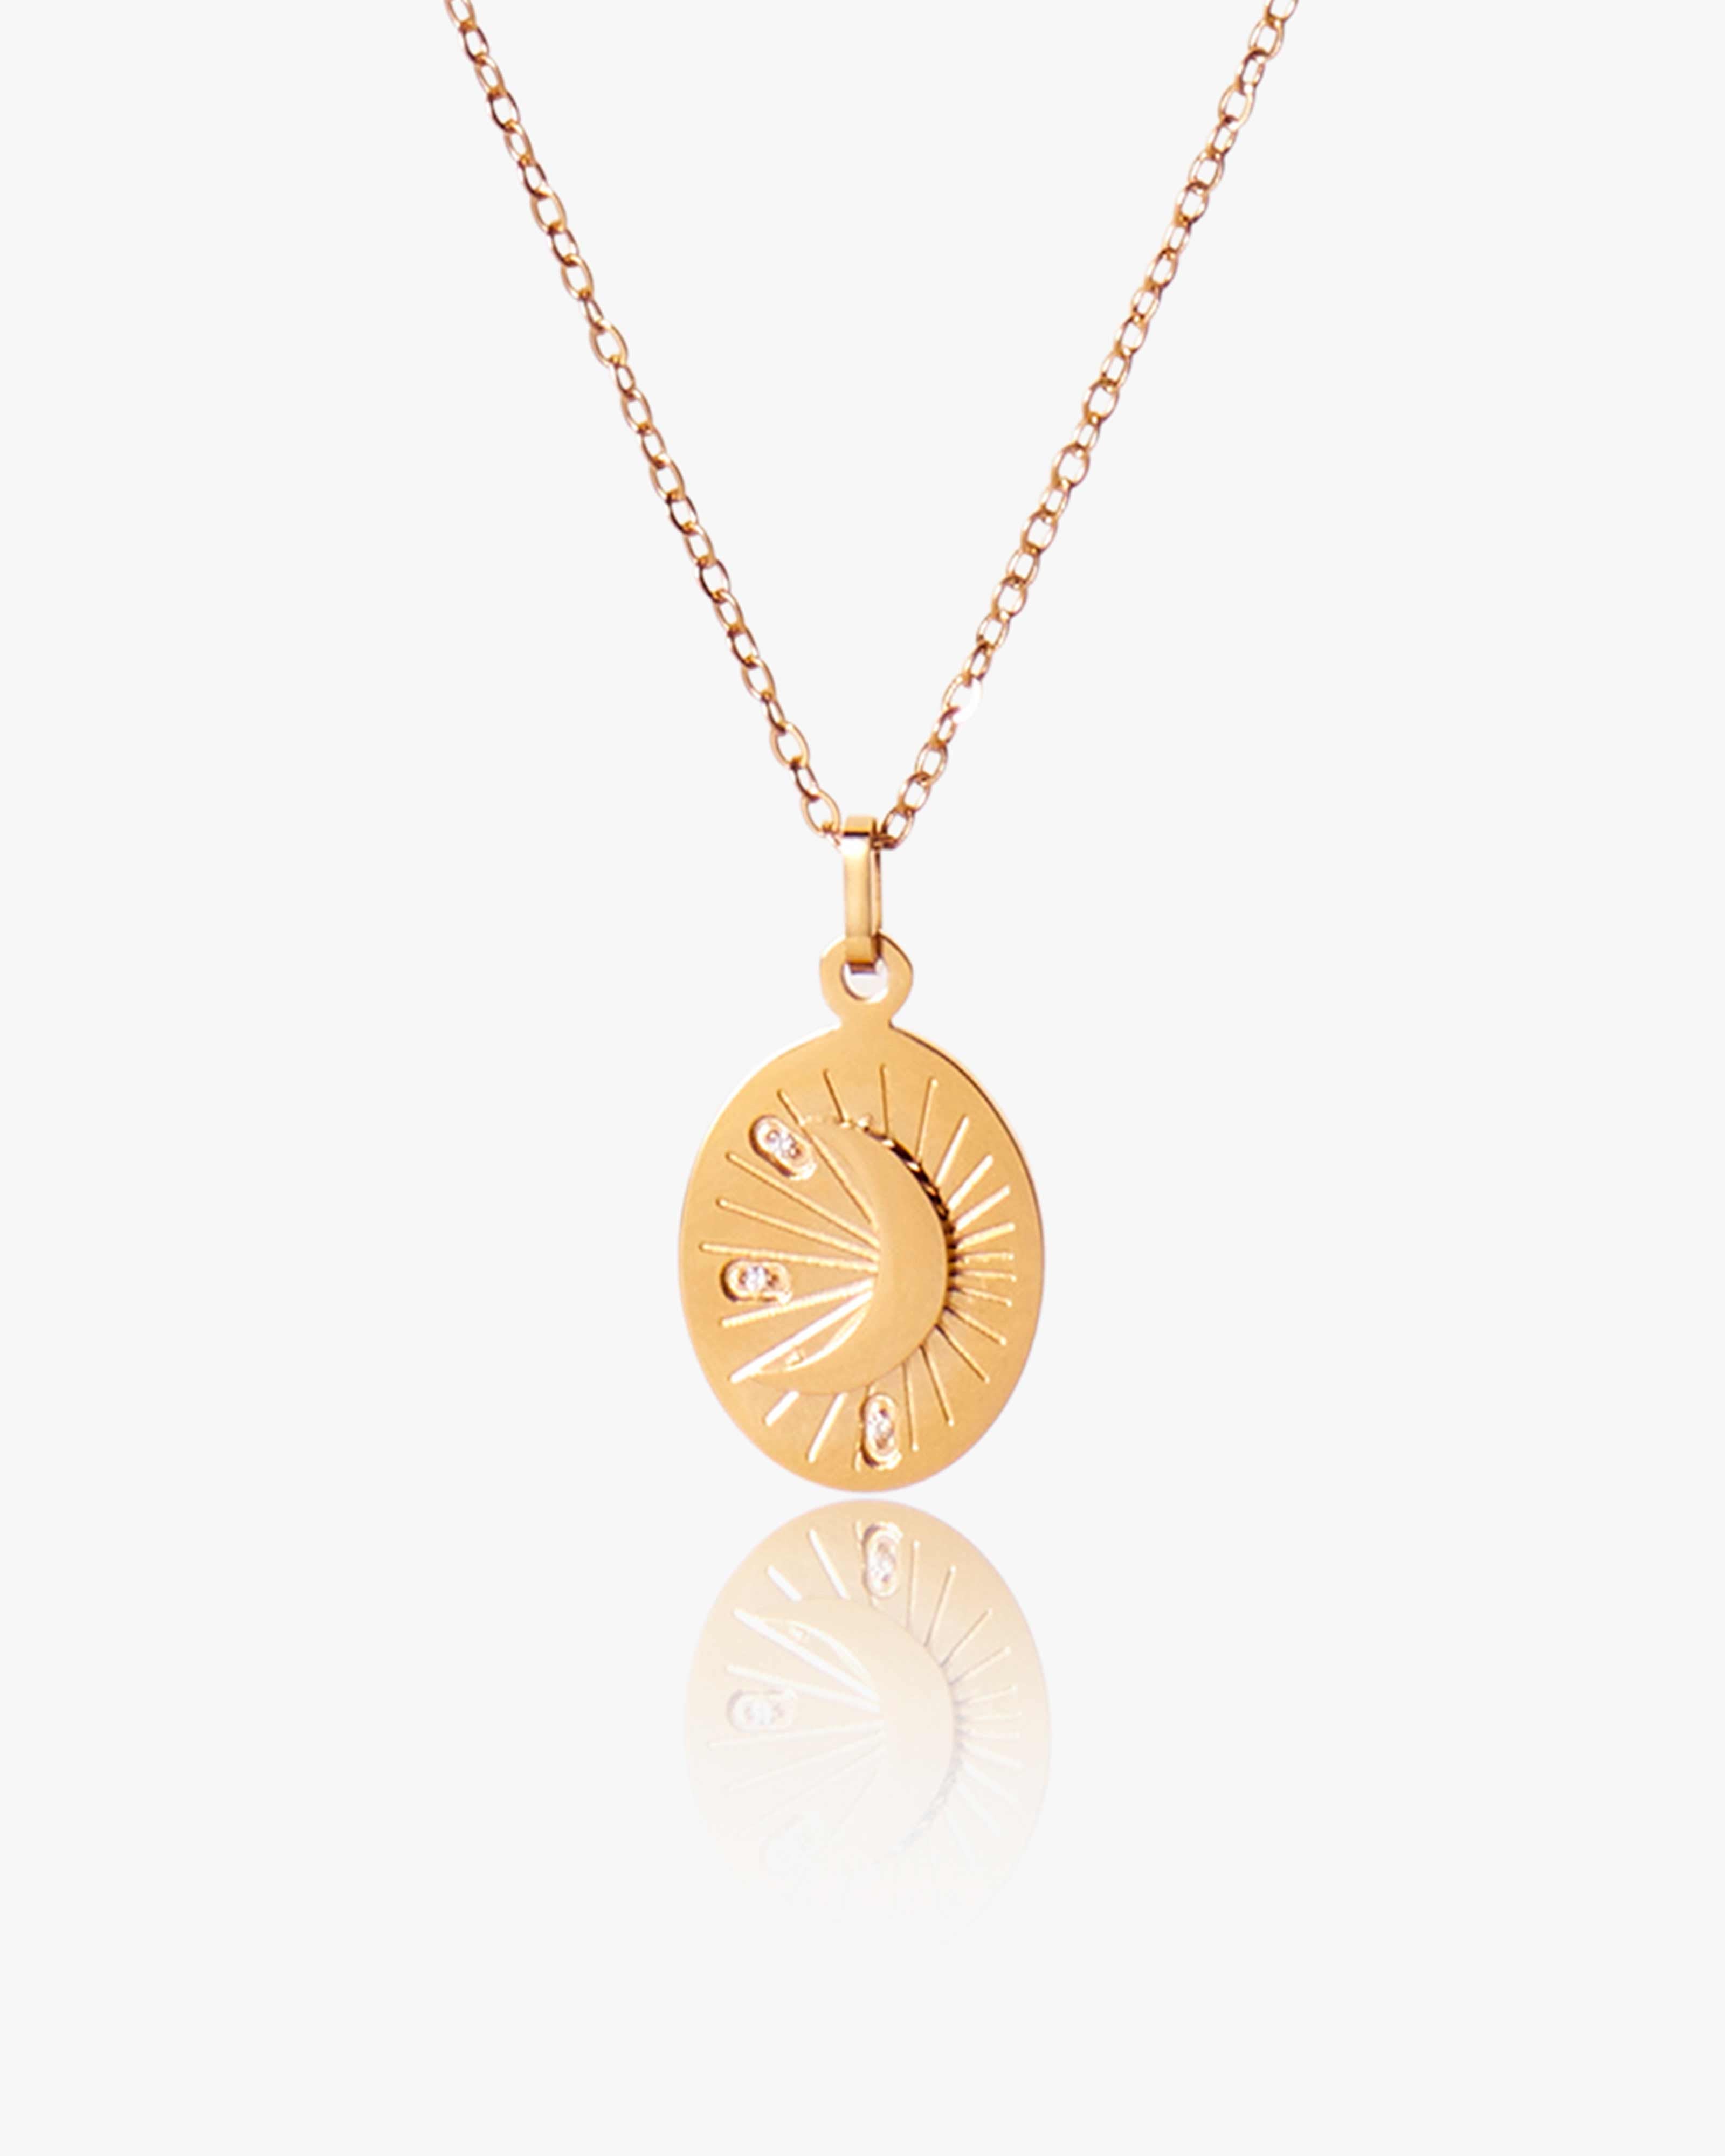 Gold Crystal Moon Pendant Necklace